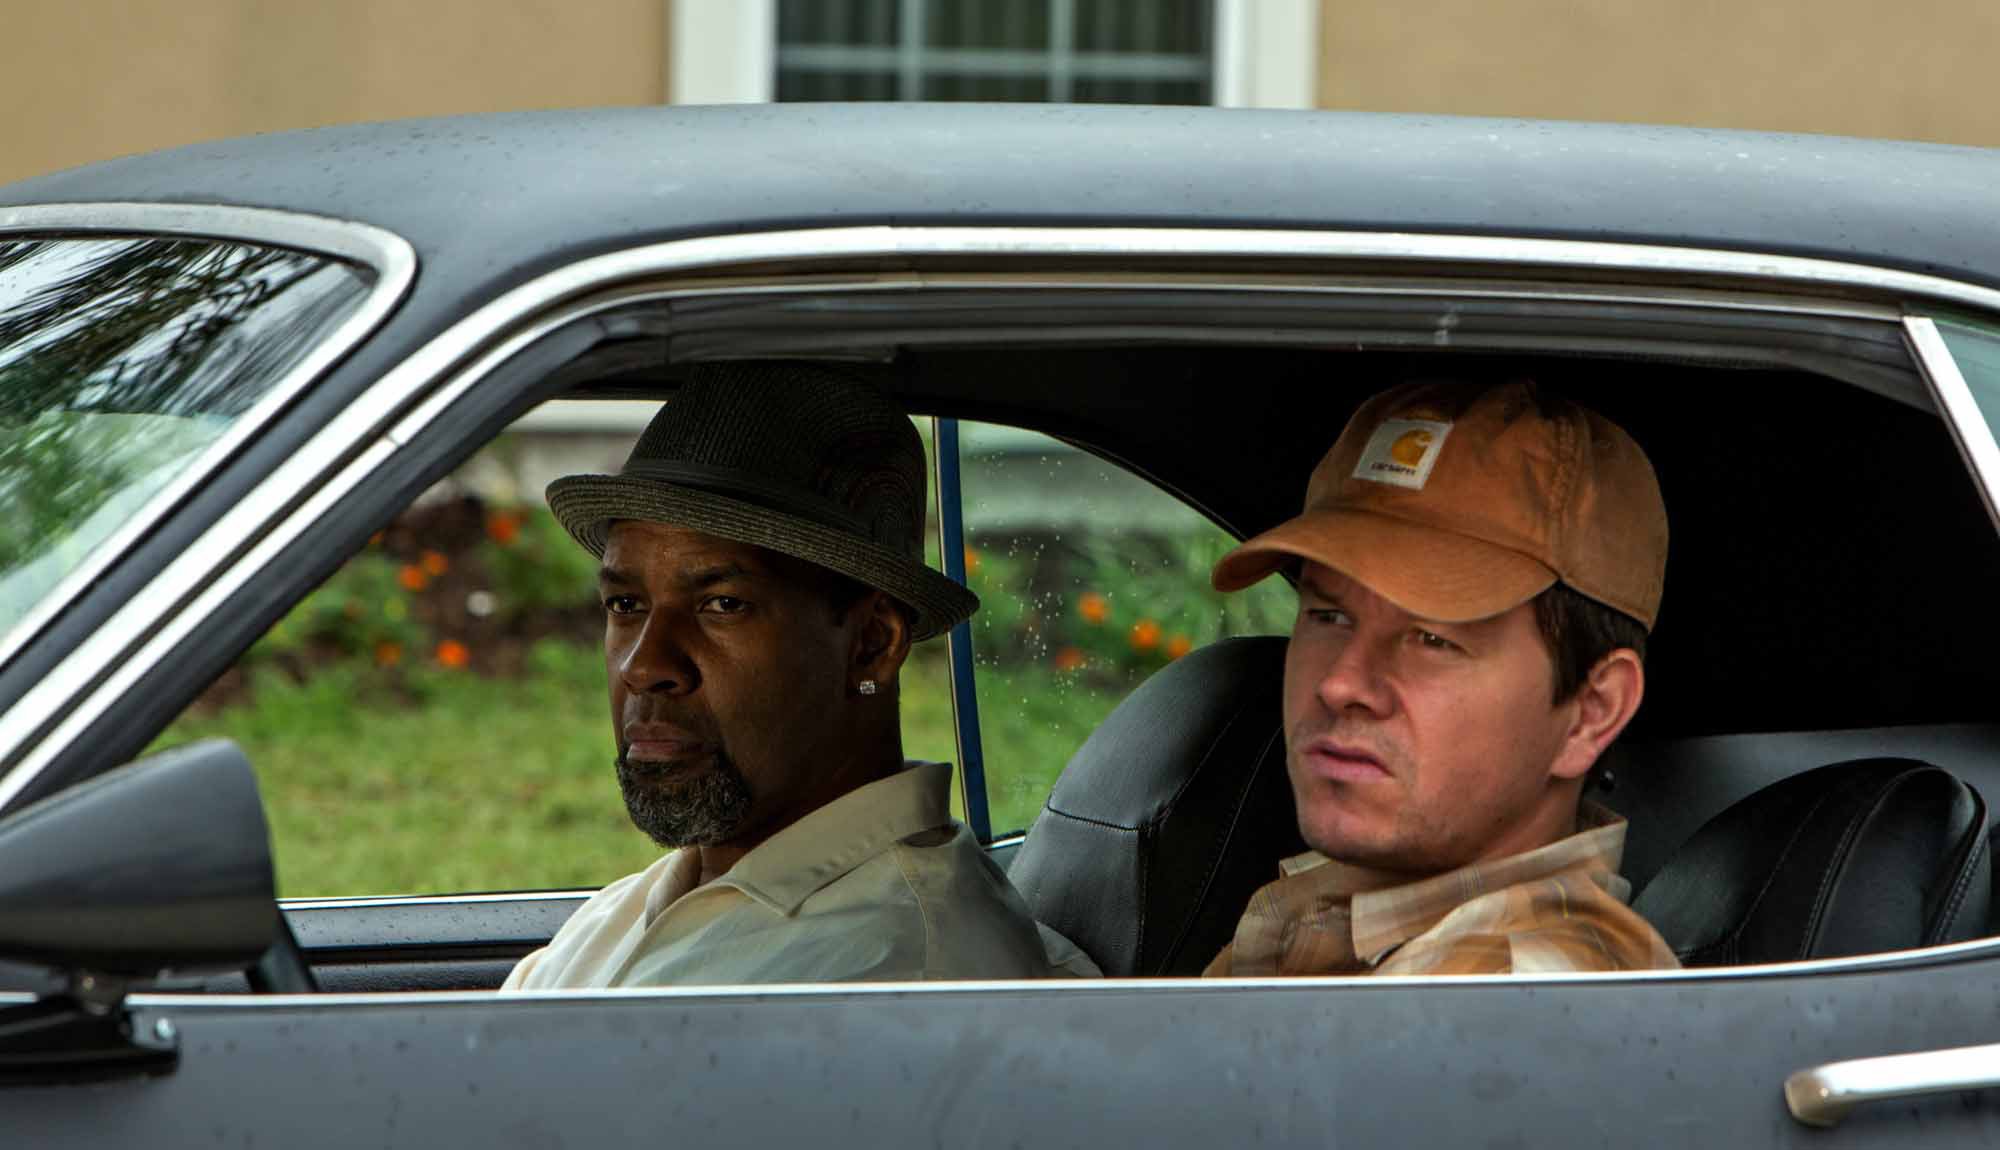 Loved 2 Guns? Here Are 8 Movies You Will Also Like